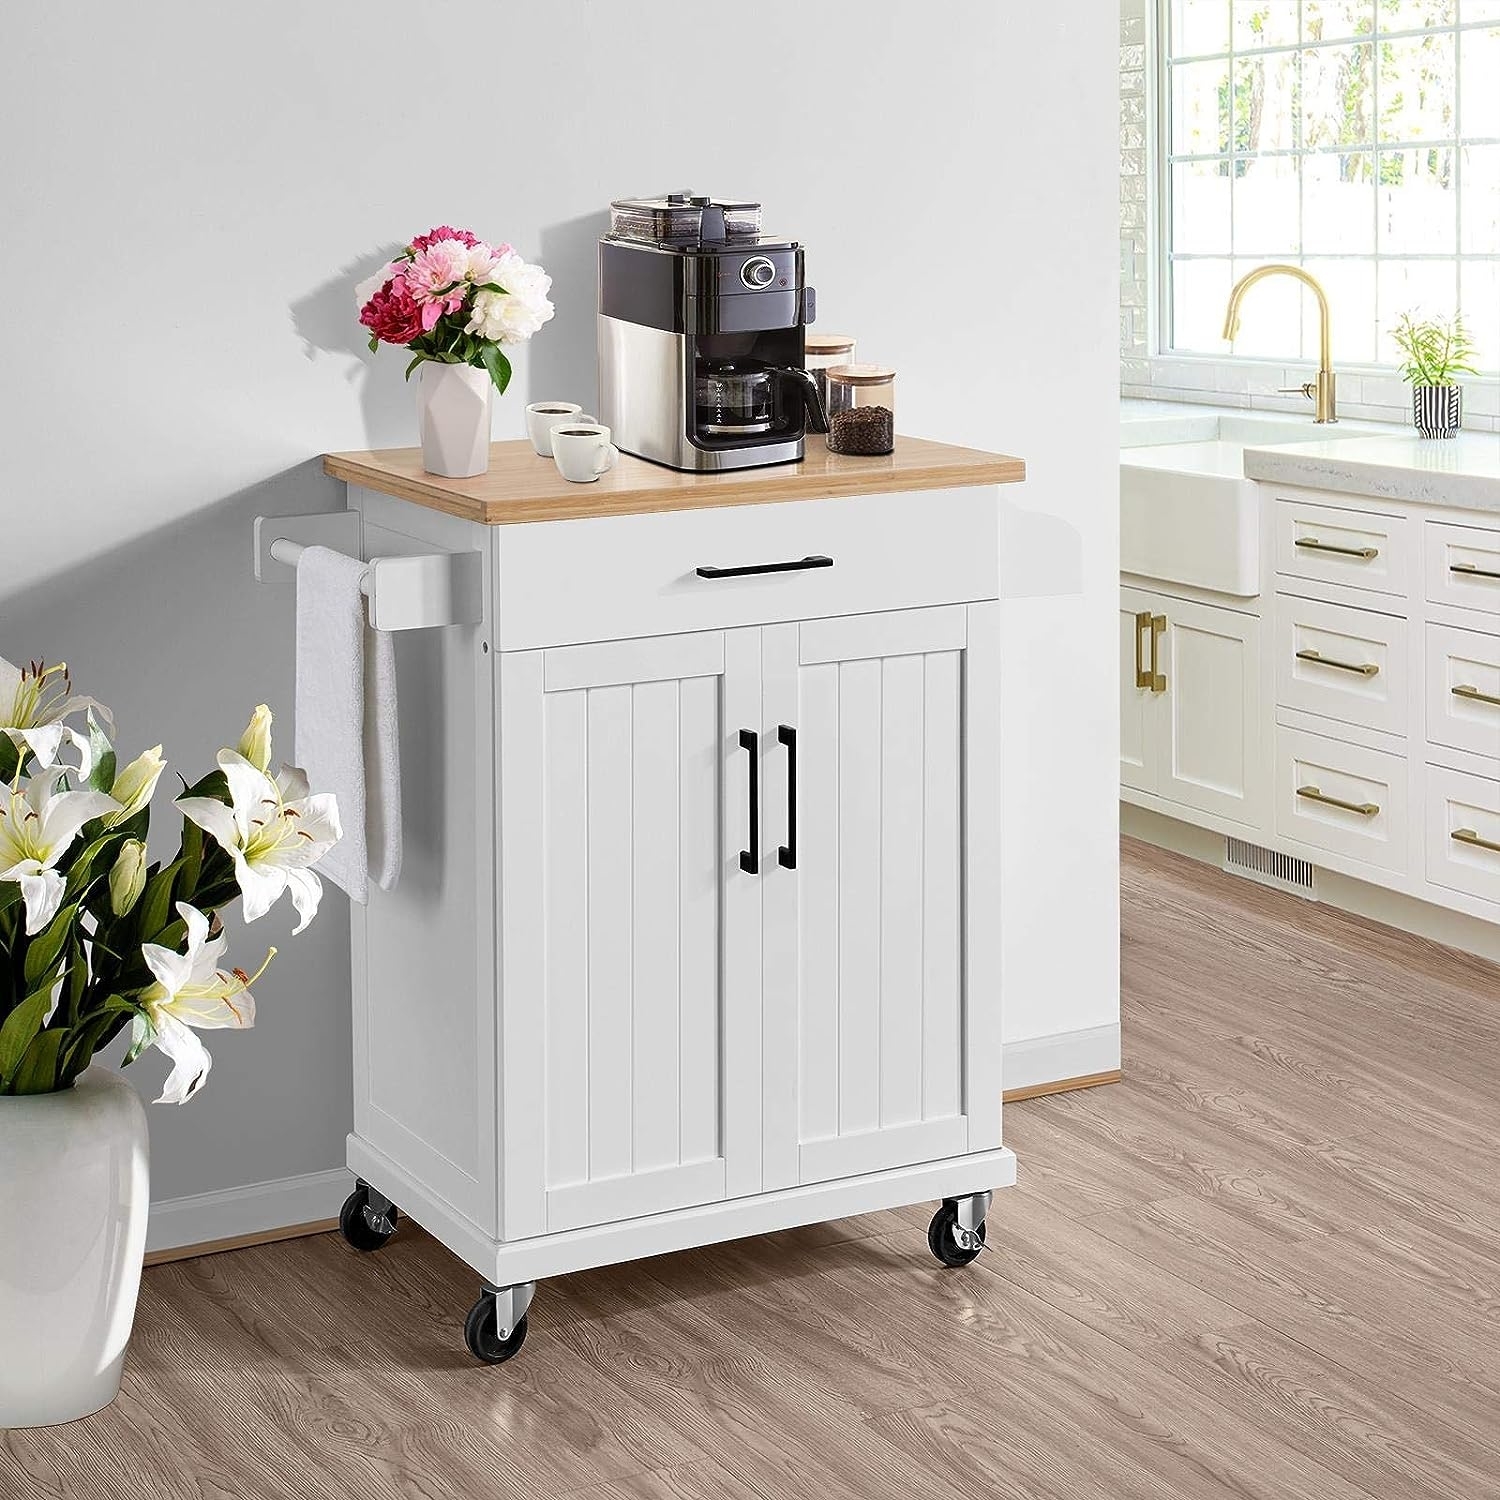 white rolling kitchen cart with bamboo top, cabinet, drawer, towel bar, and spice rack.